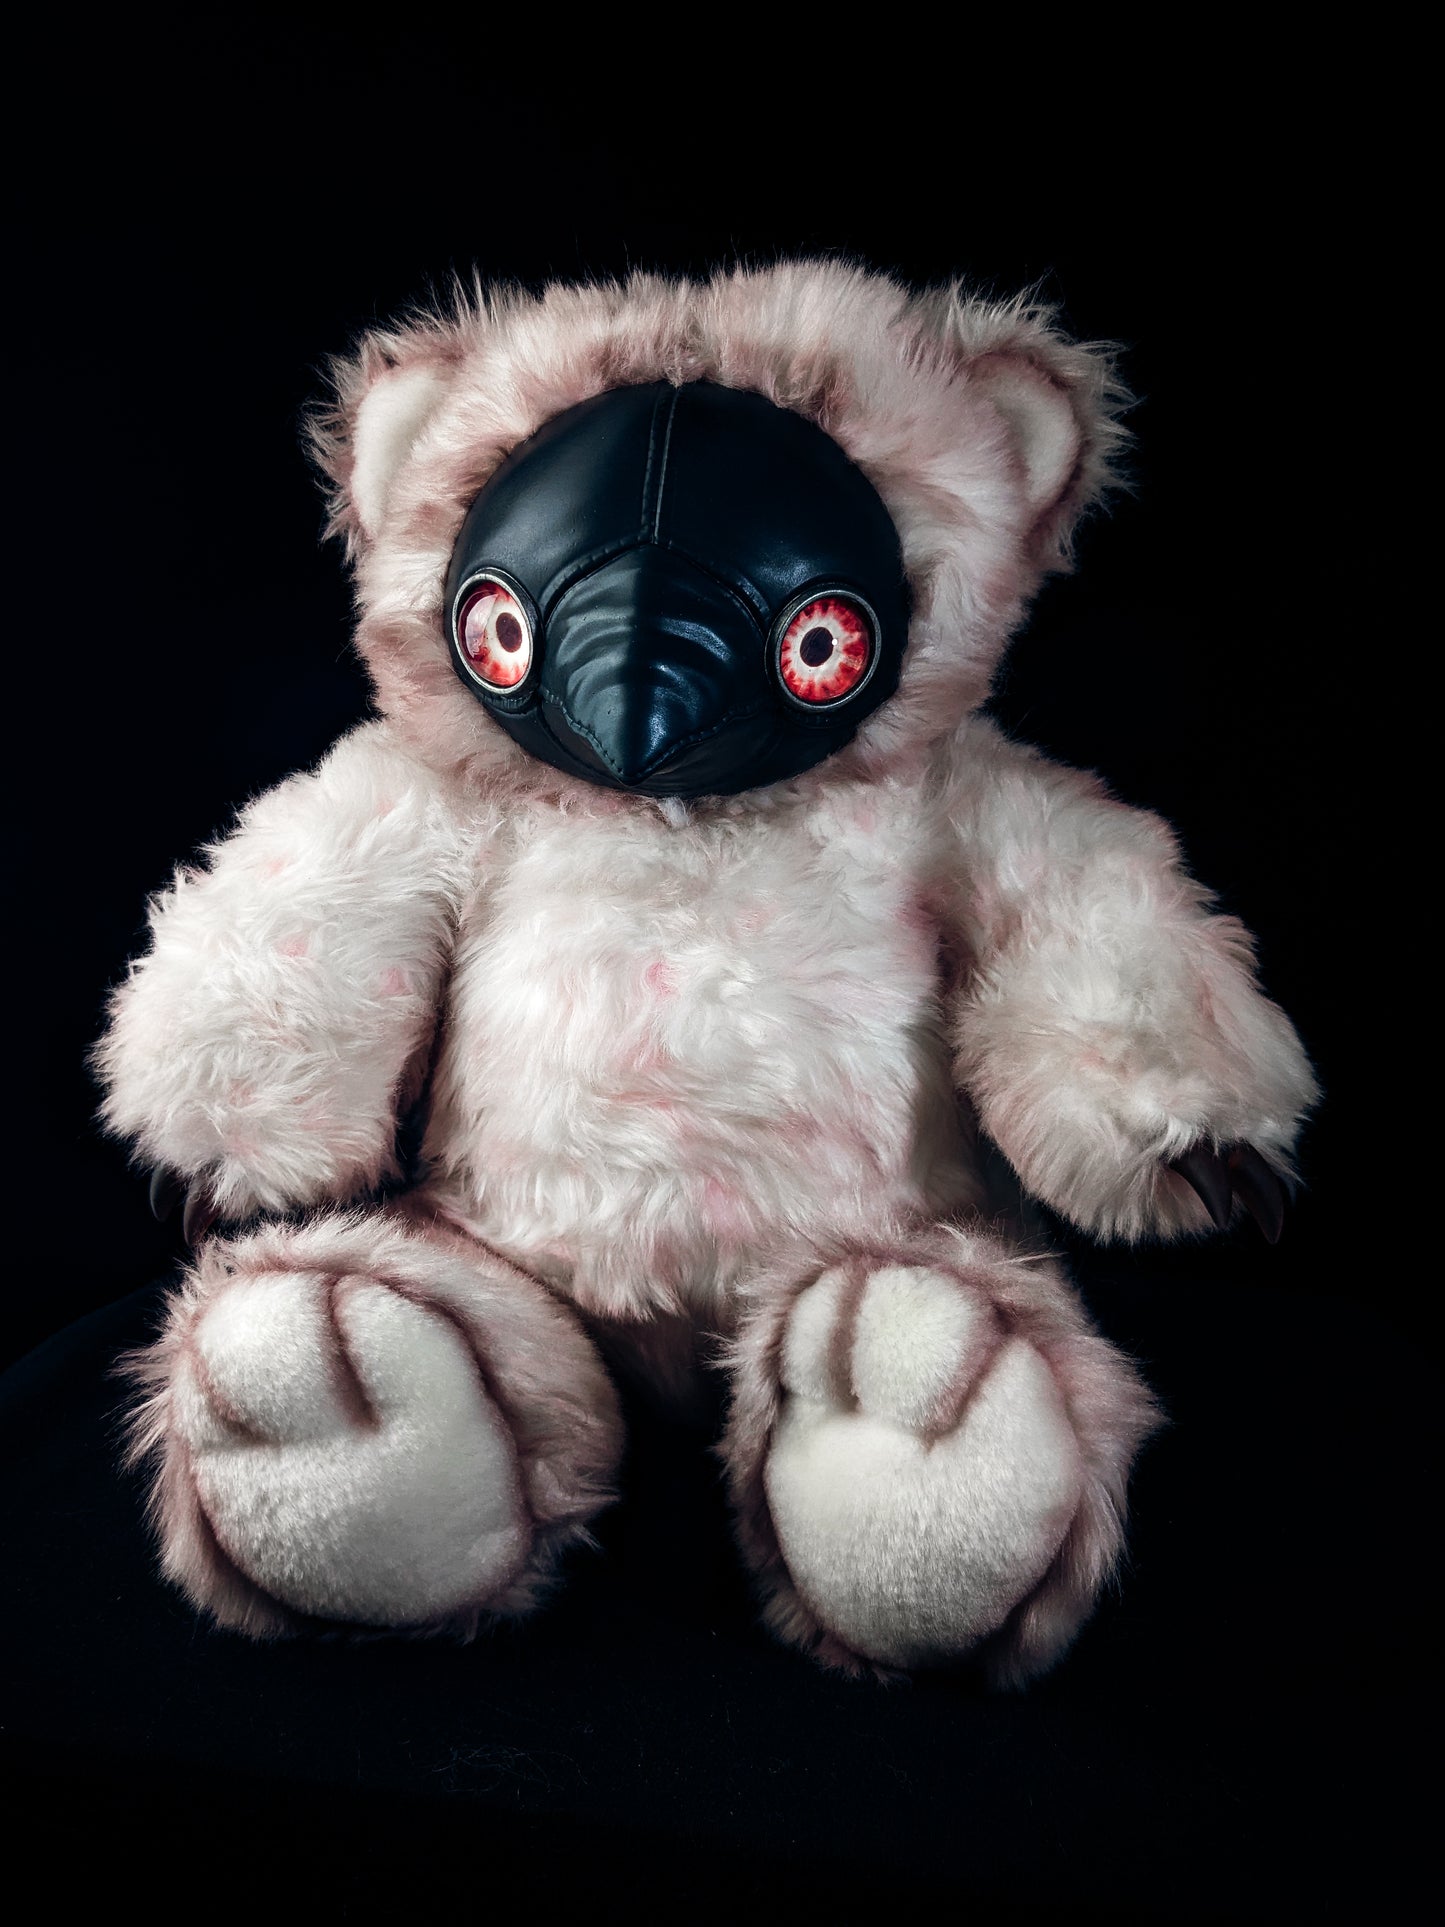 Manic Malpractice: AMBROISE - CRYPTCRITZ Handcrafted Creepy Cute Plague Doctor Art Doll Plush Toy for Eccentric Souls